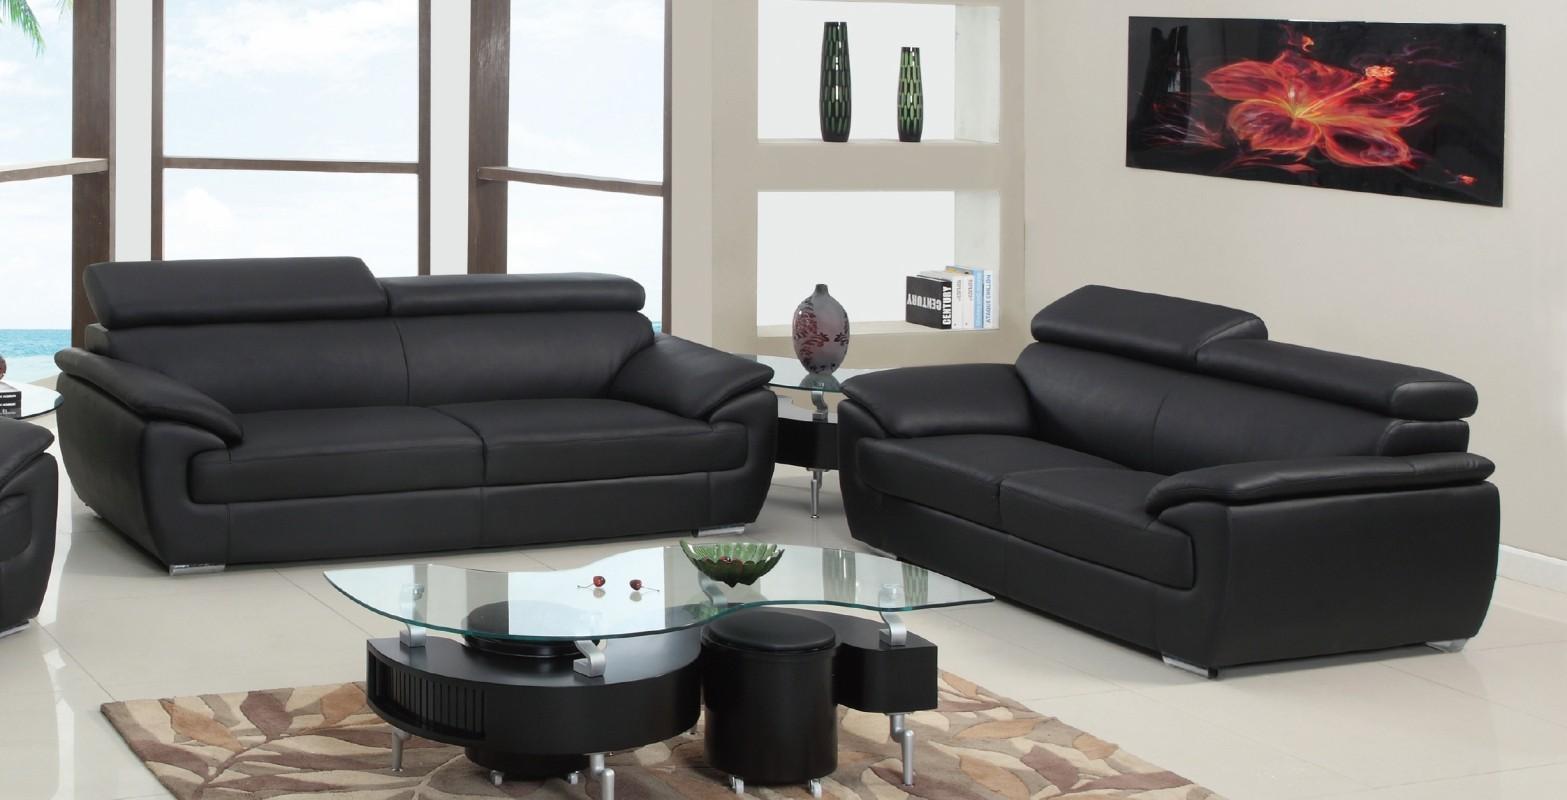 Contemporary Sofa and Loveseat Set Teagan SKU: HTBO1007 in Black Leather Match